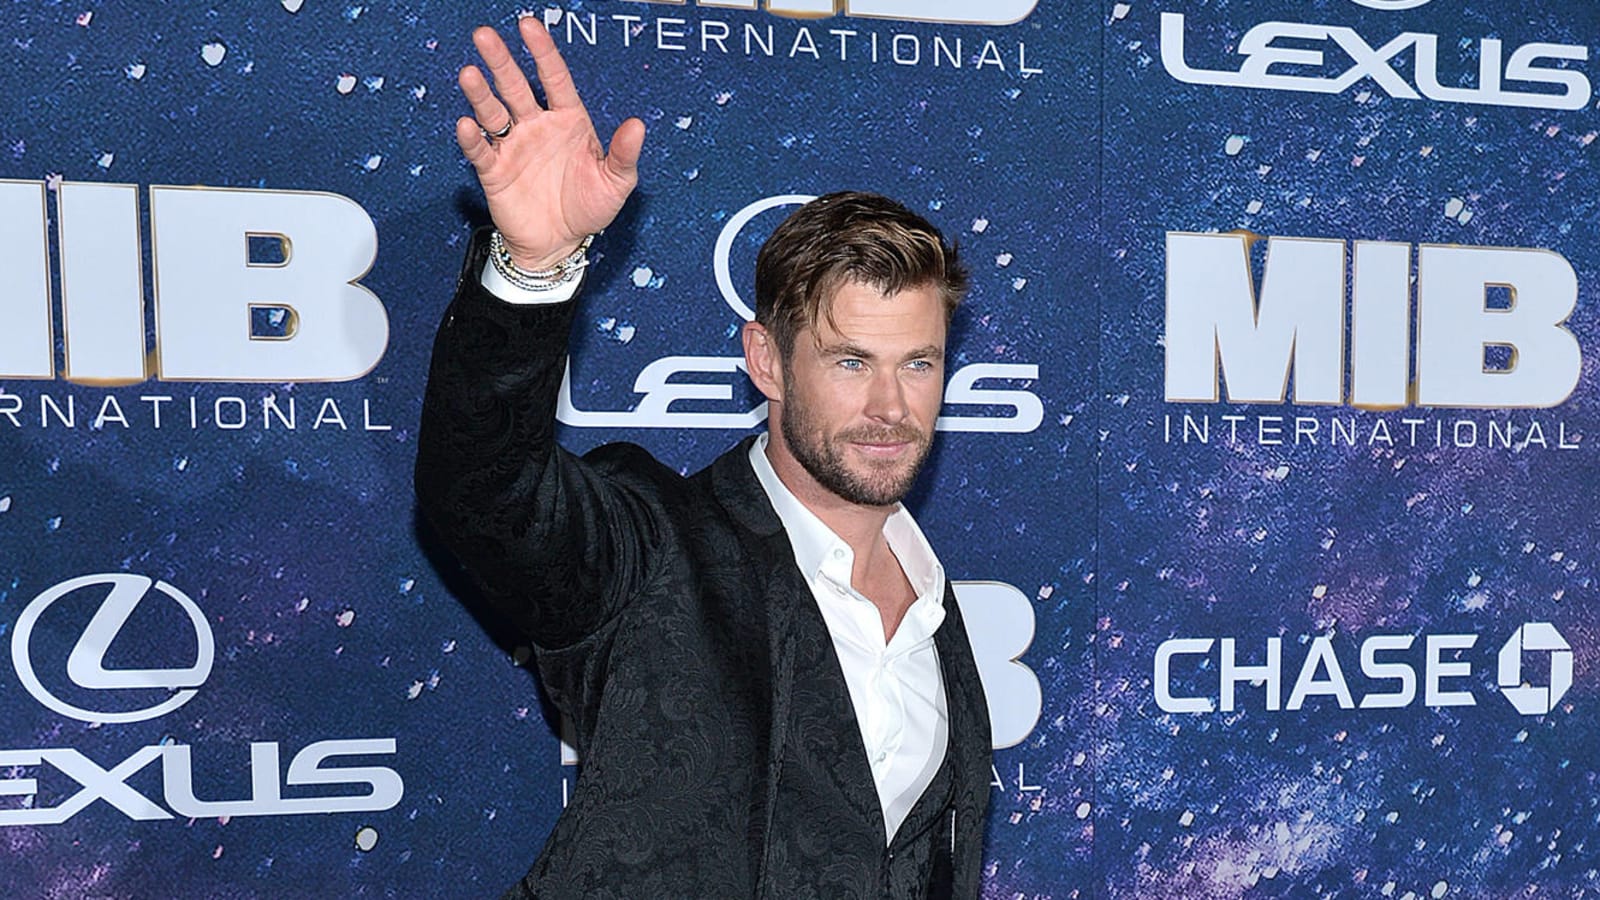 Chris Hemsworth laments 'unhealthy' body standards required for Thor